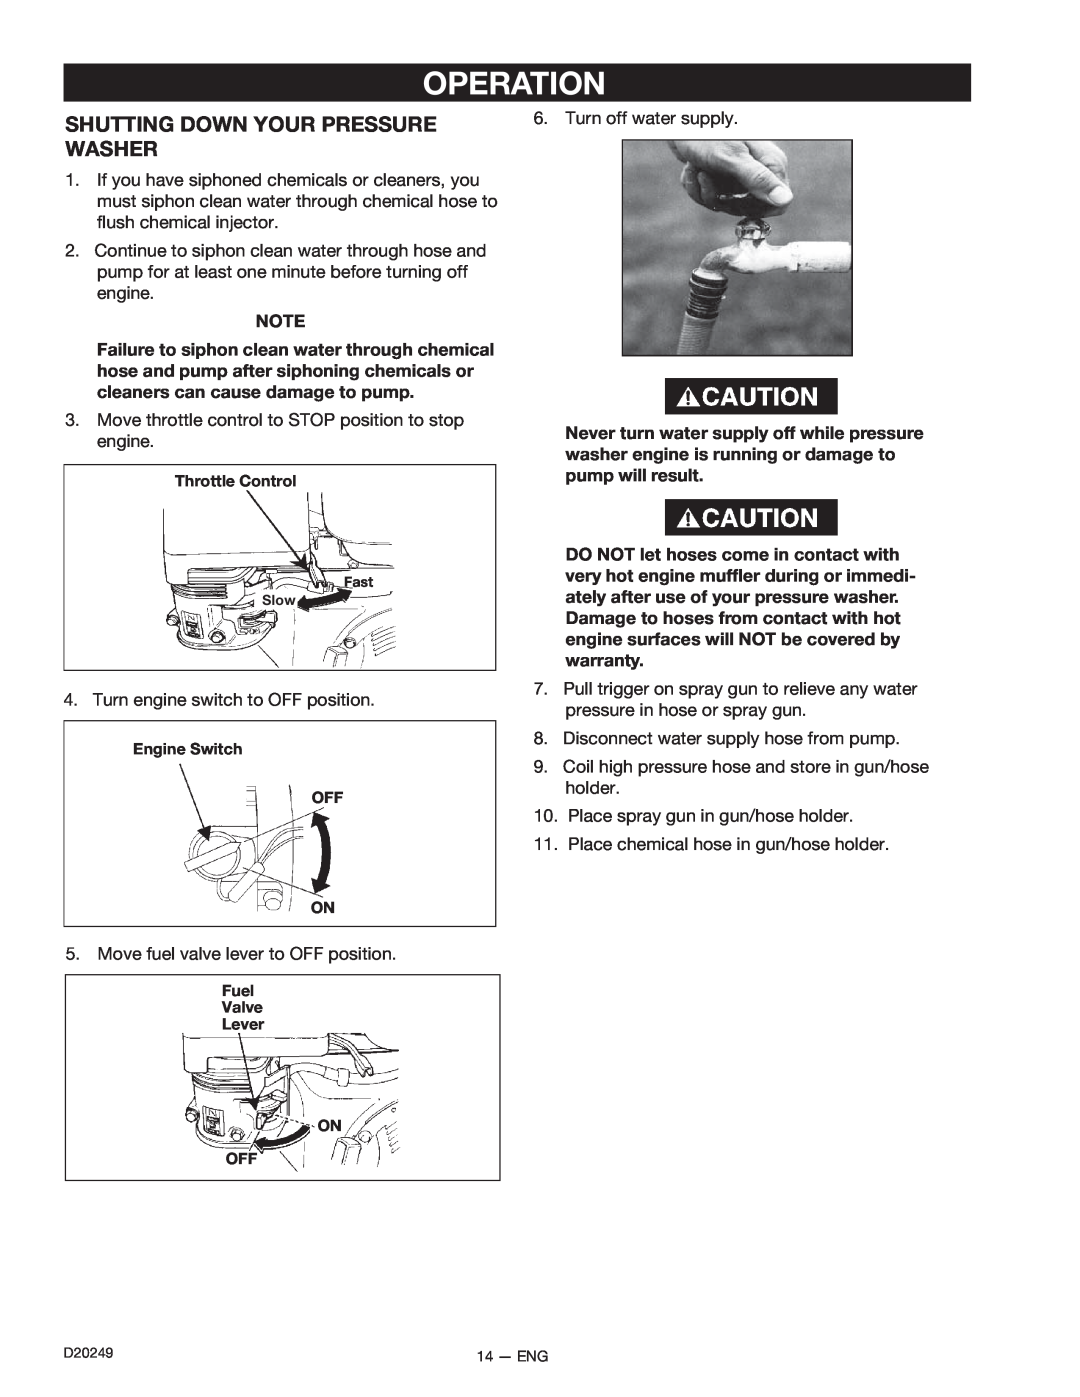 DeVillbiss Air Power Company D20249, 3540CWHP owner manual Shutting Down Your Pressure Washer, Operation 